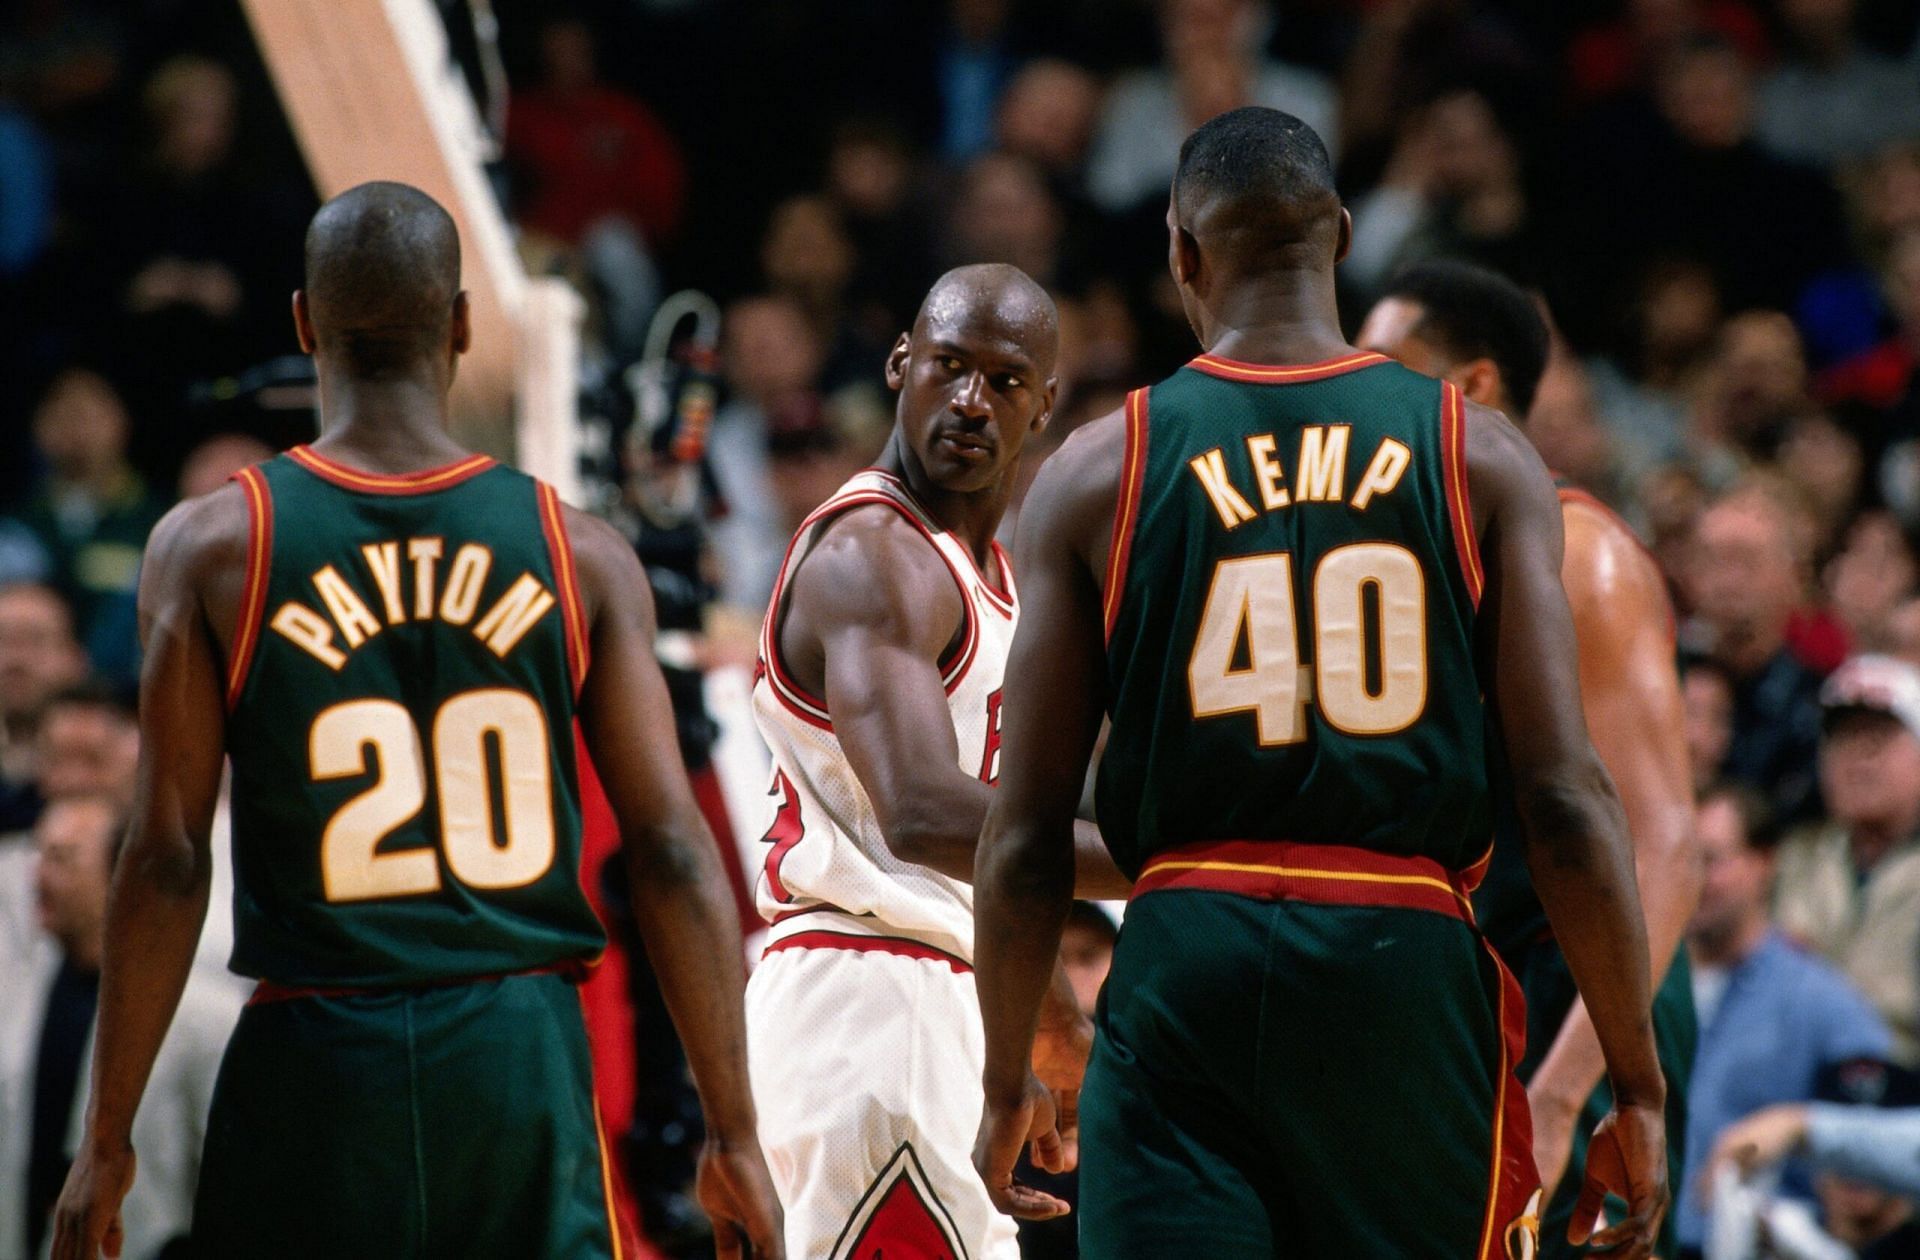 Gary Payton and Shawn Kemp during the 1996 NBA Finals between the Seattle SuperSonics and Chicago Bulls. [photo: NBA.com]